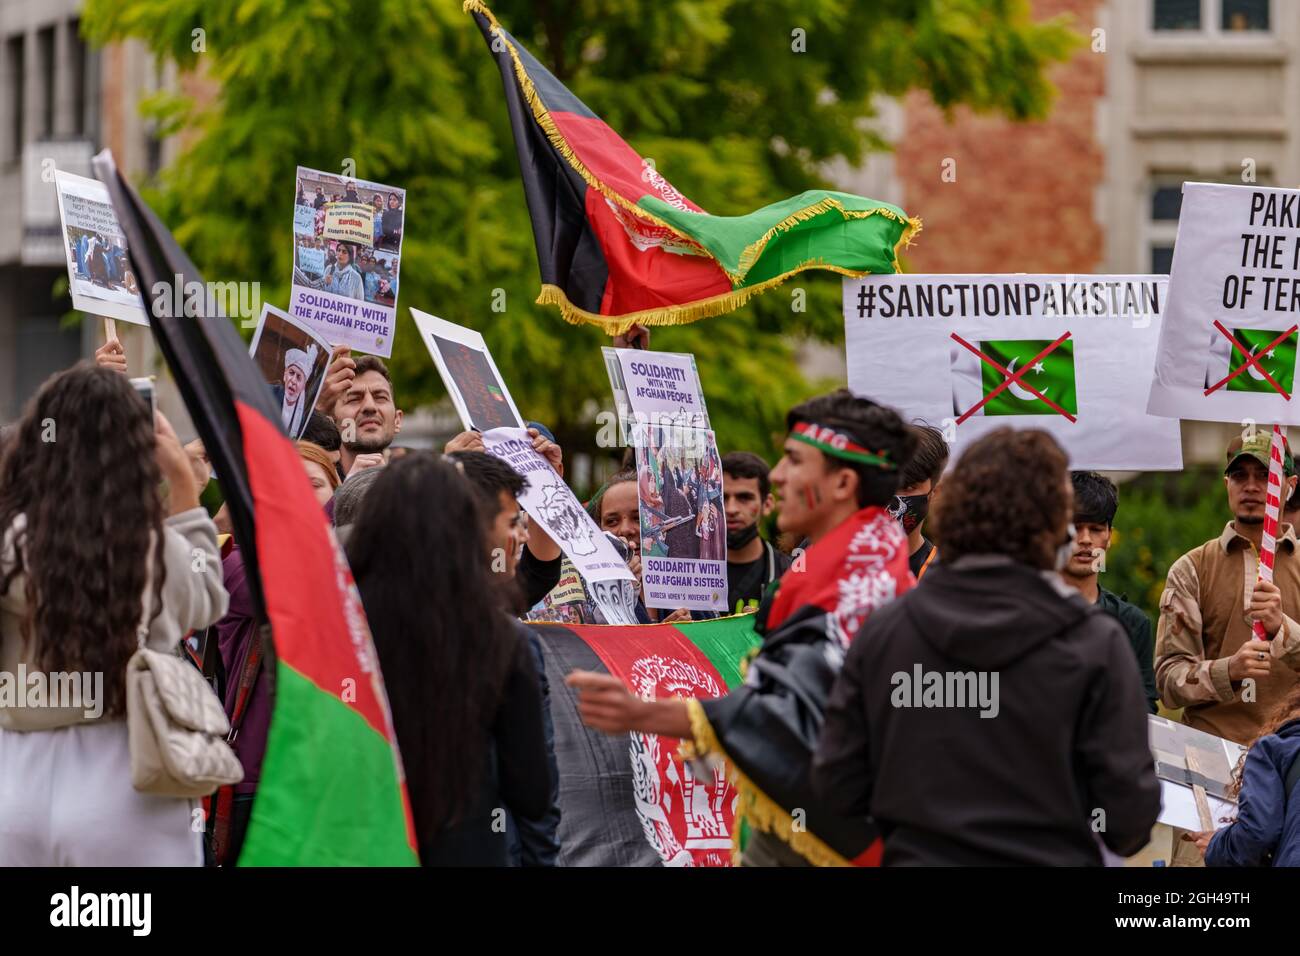 Brussels, Belgium - Aug. 18. 2021. Few hundred people gathered at the European Commission HQ to protest against the current situation in Afghanistan. Stock Photo